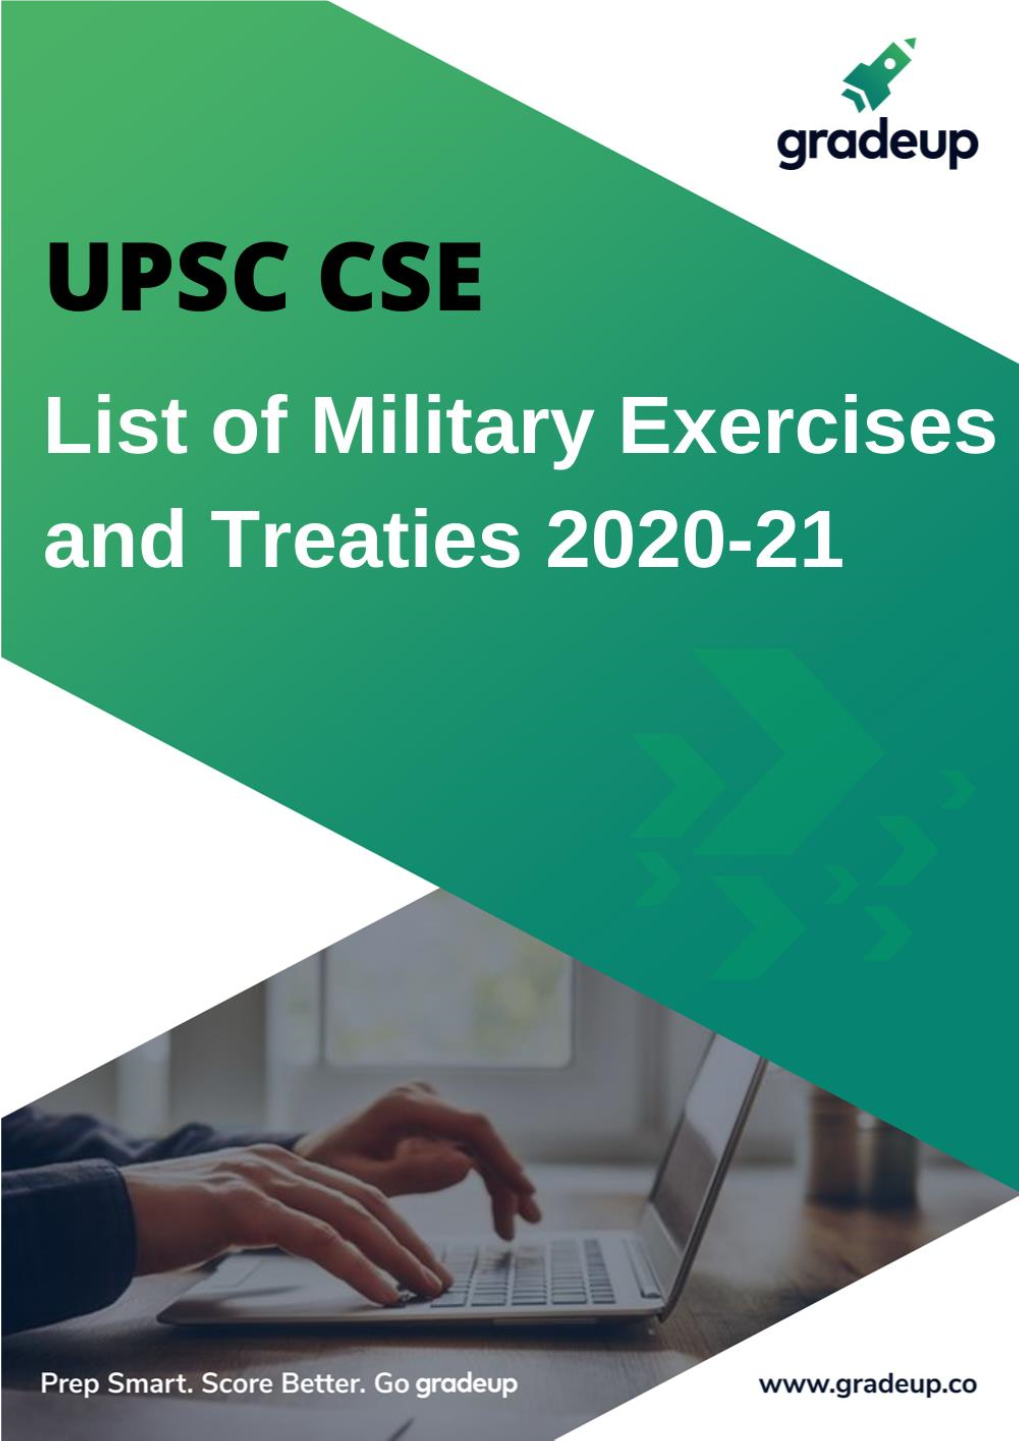 List of Joint Military Exercises of India and Overseas Treaties 2020-21